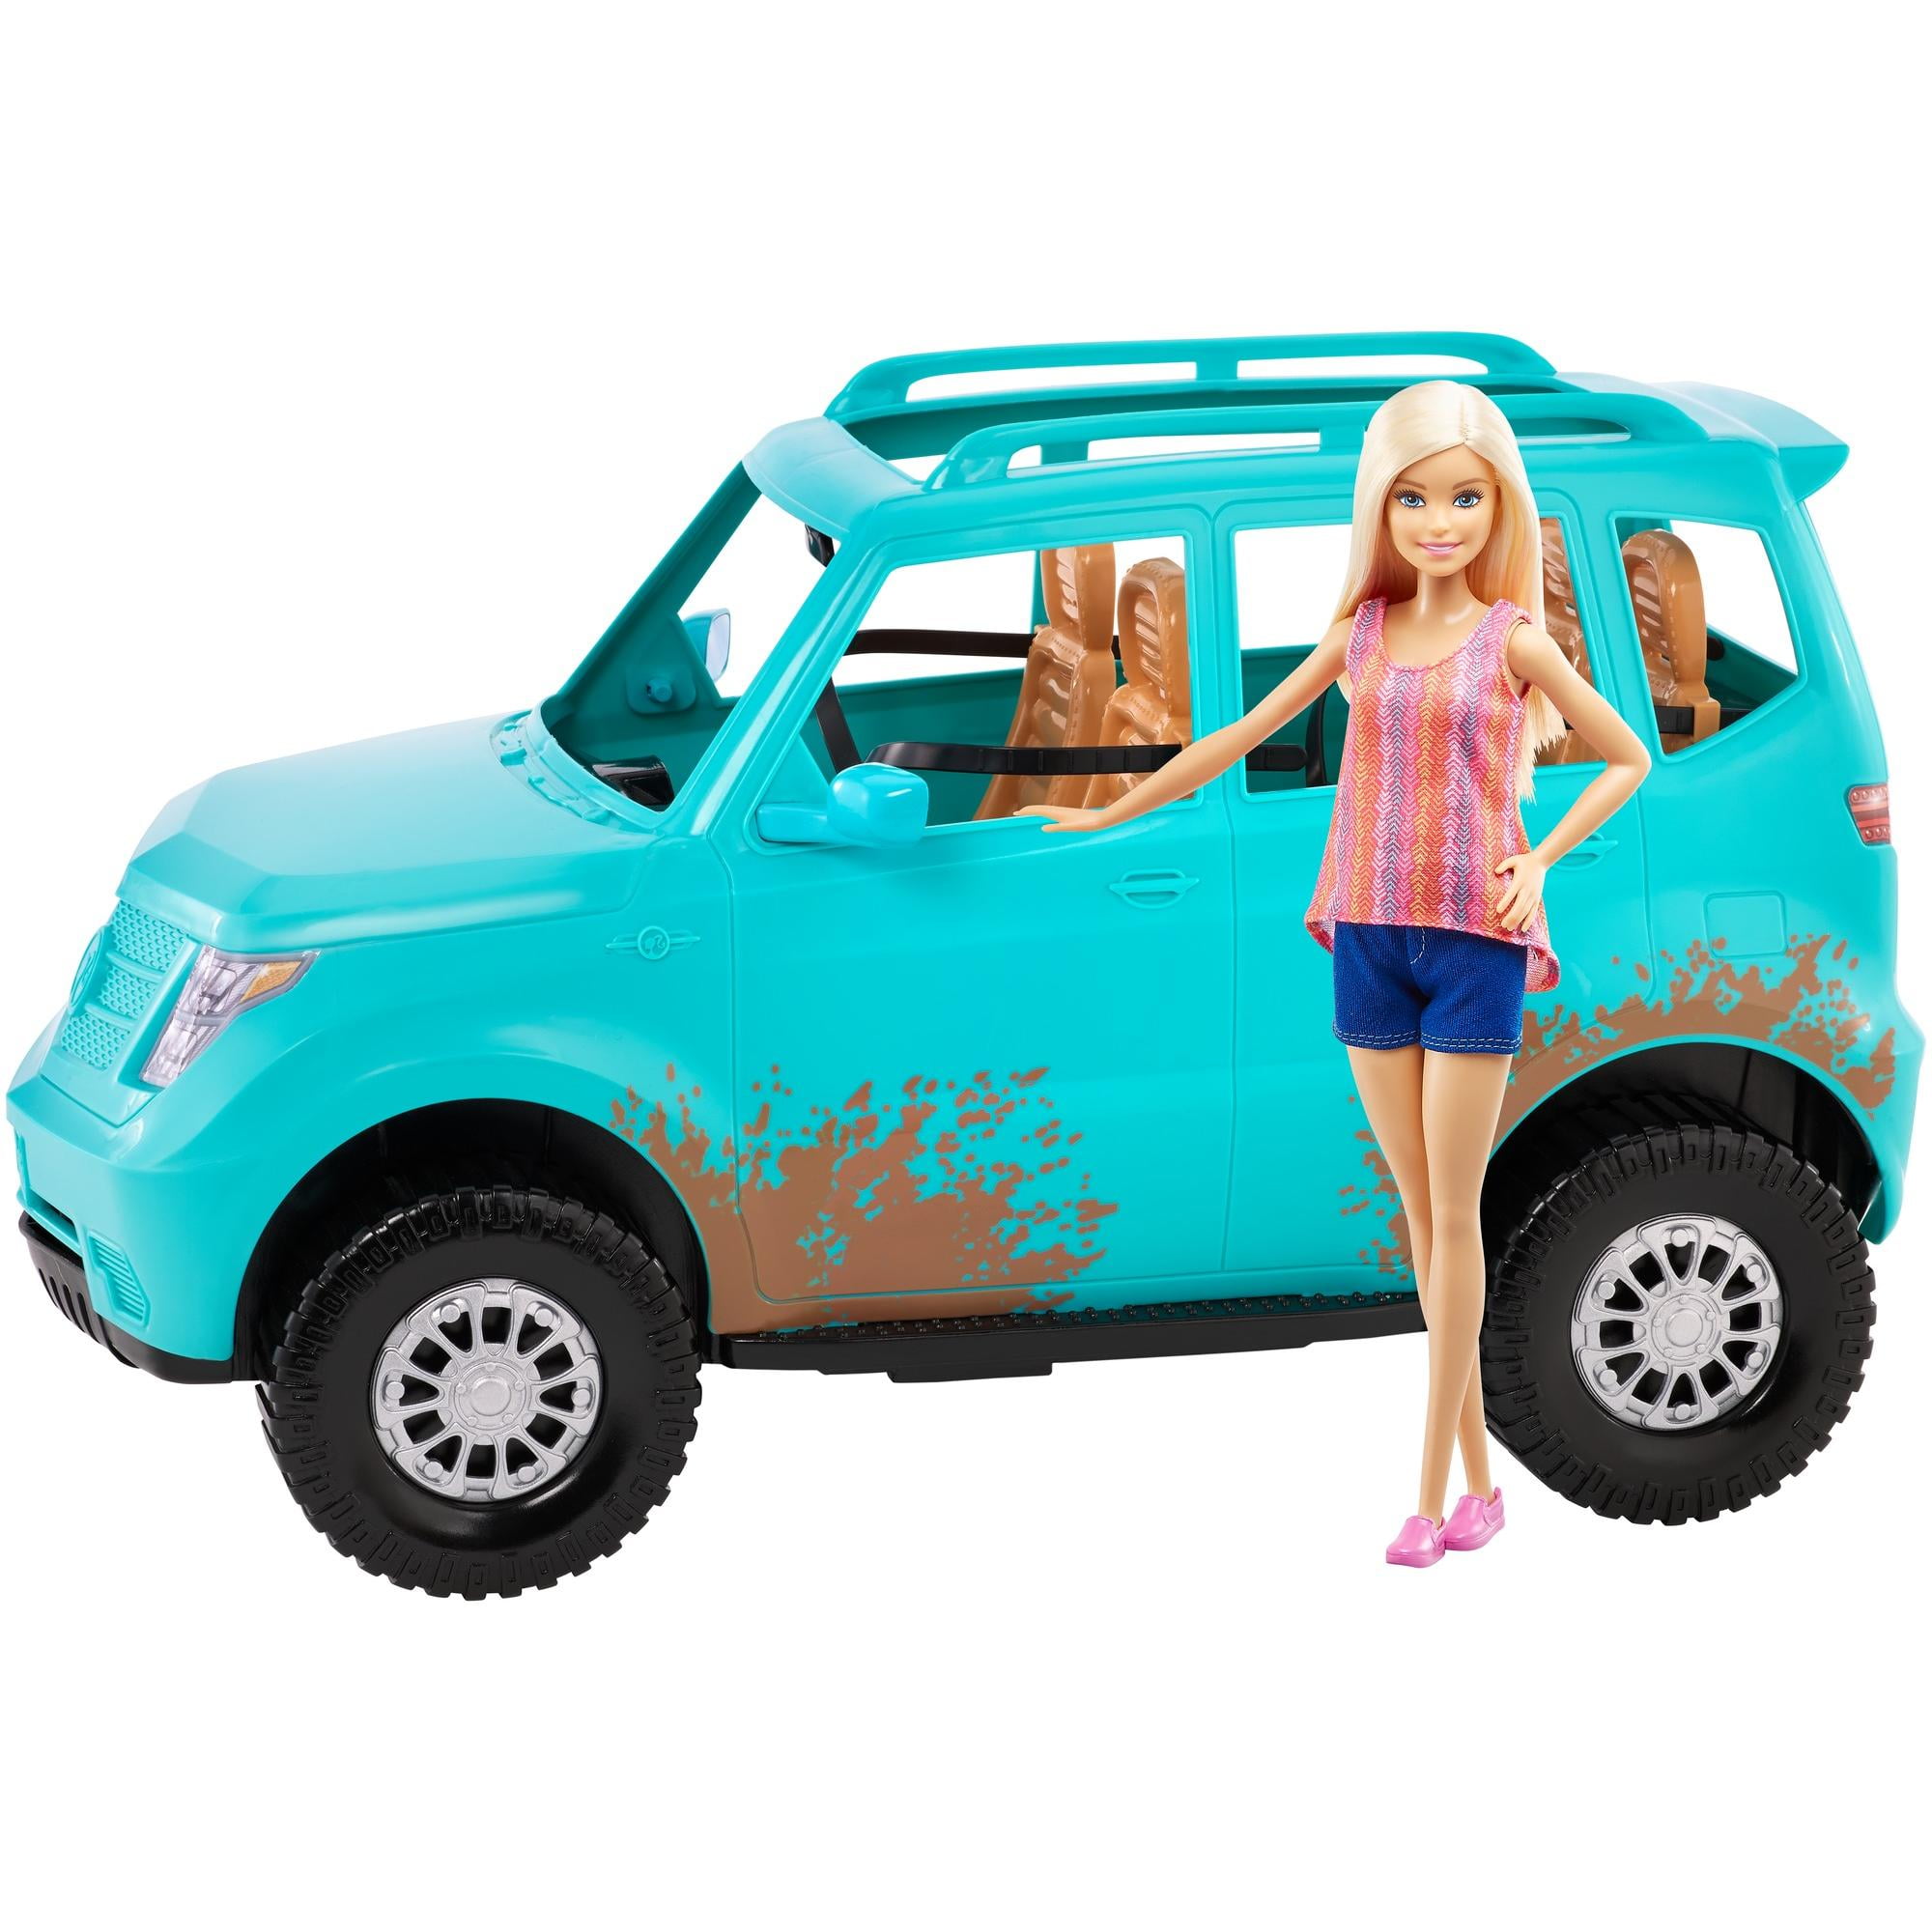 Barbie Camping Fun Doll and Teal Off-Road Adventure Vehicle -